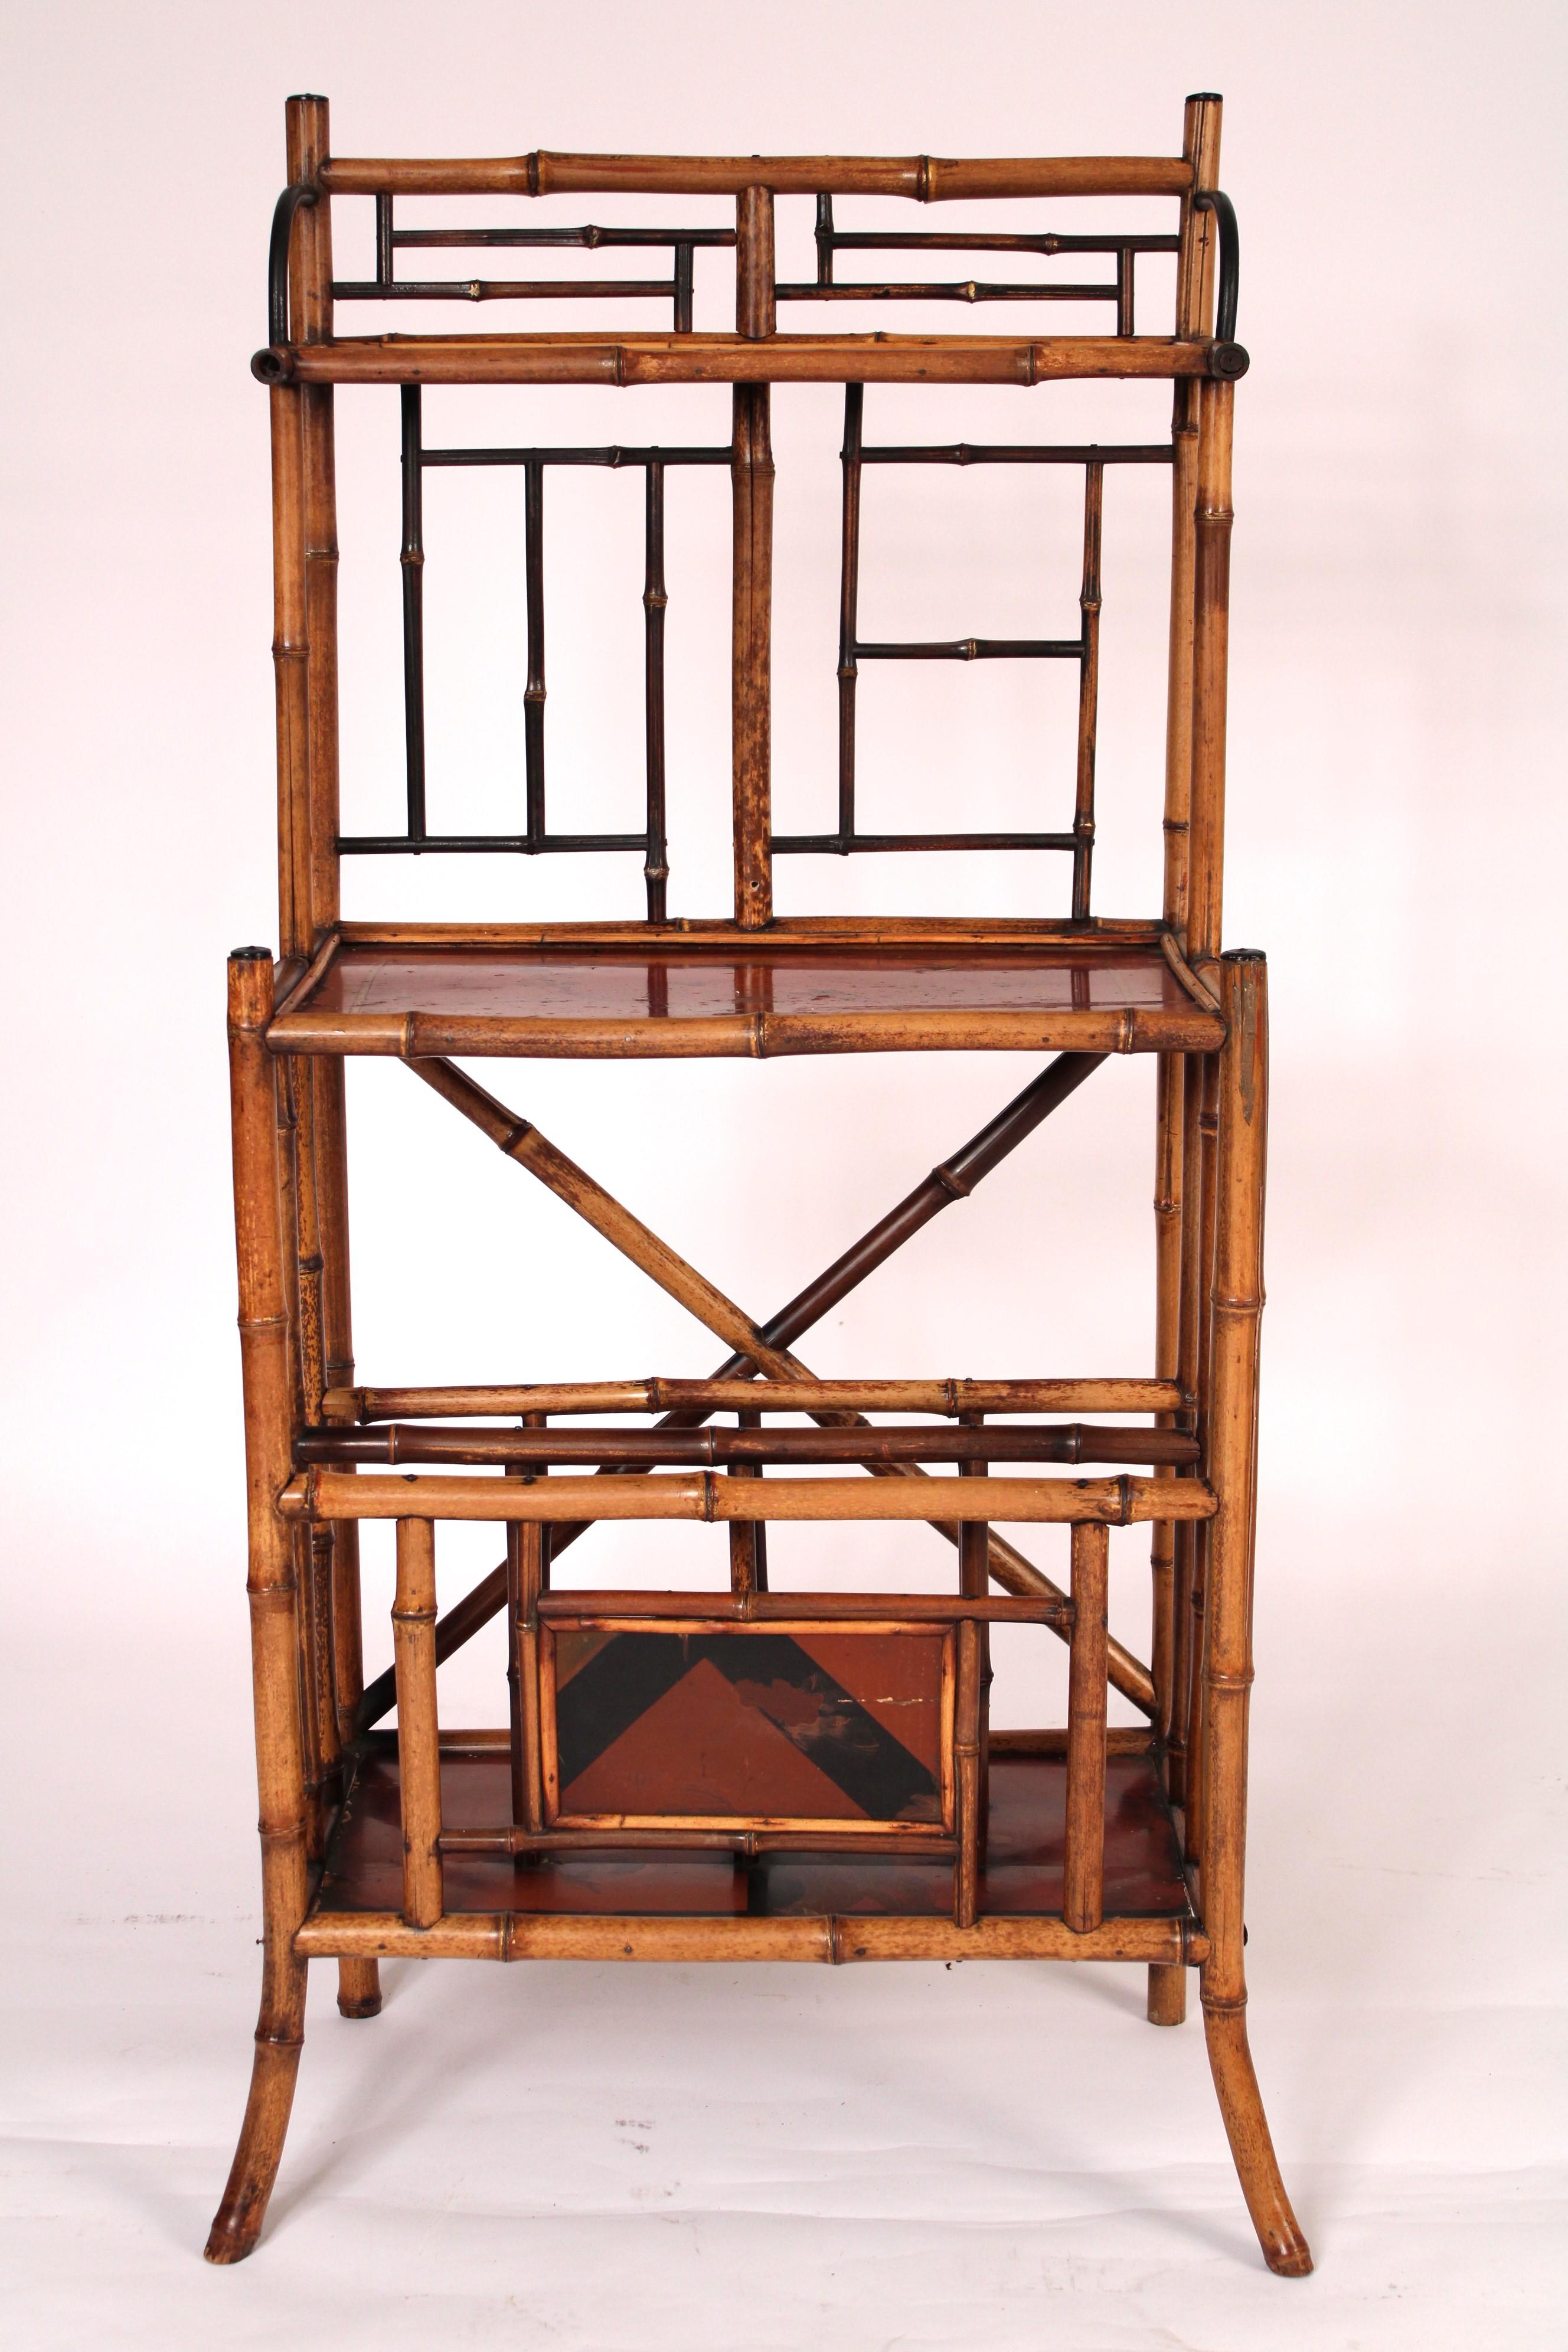 Aesthetic movement bamboo and lacquered etagere / canterbury, circa 1910. With bamboo frame work and lacquered panels. The lower section is a magazine rack.